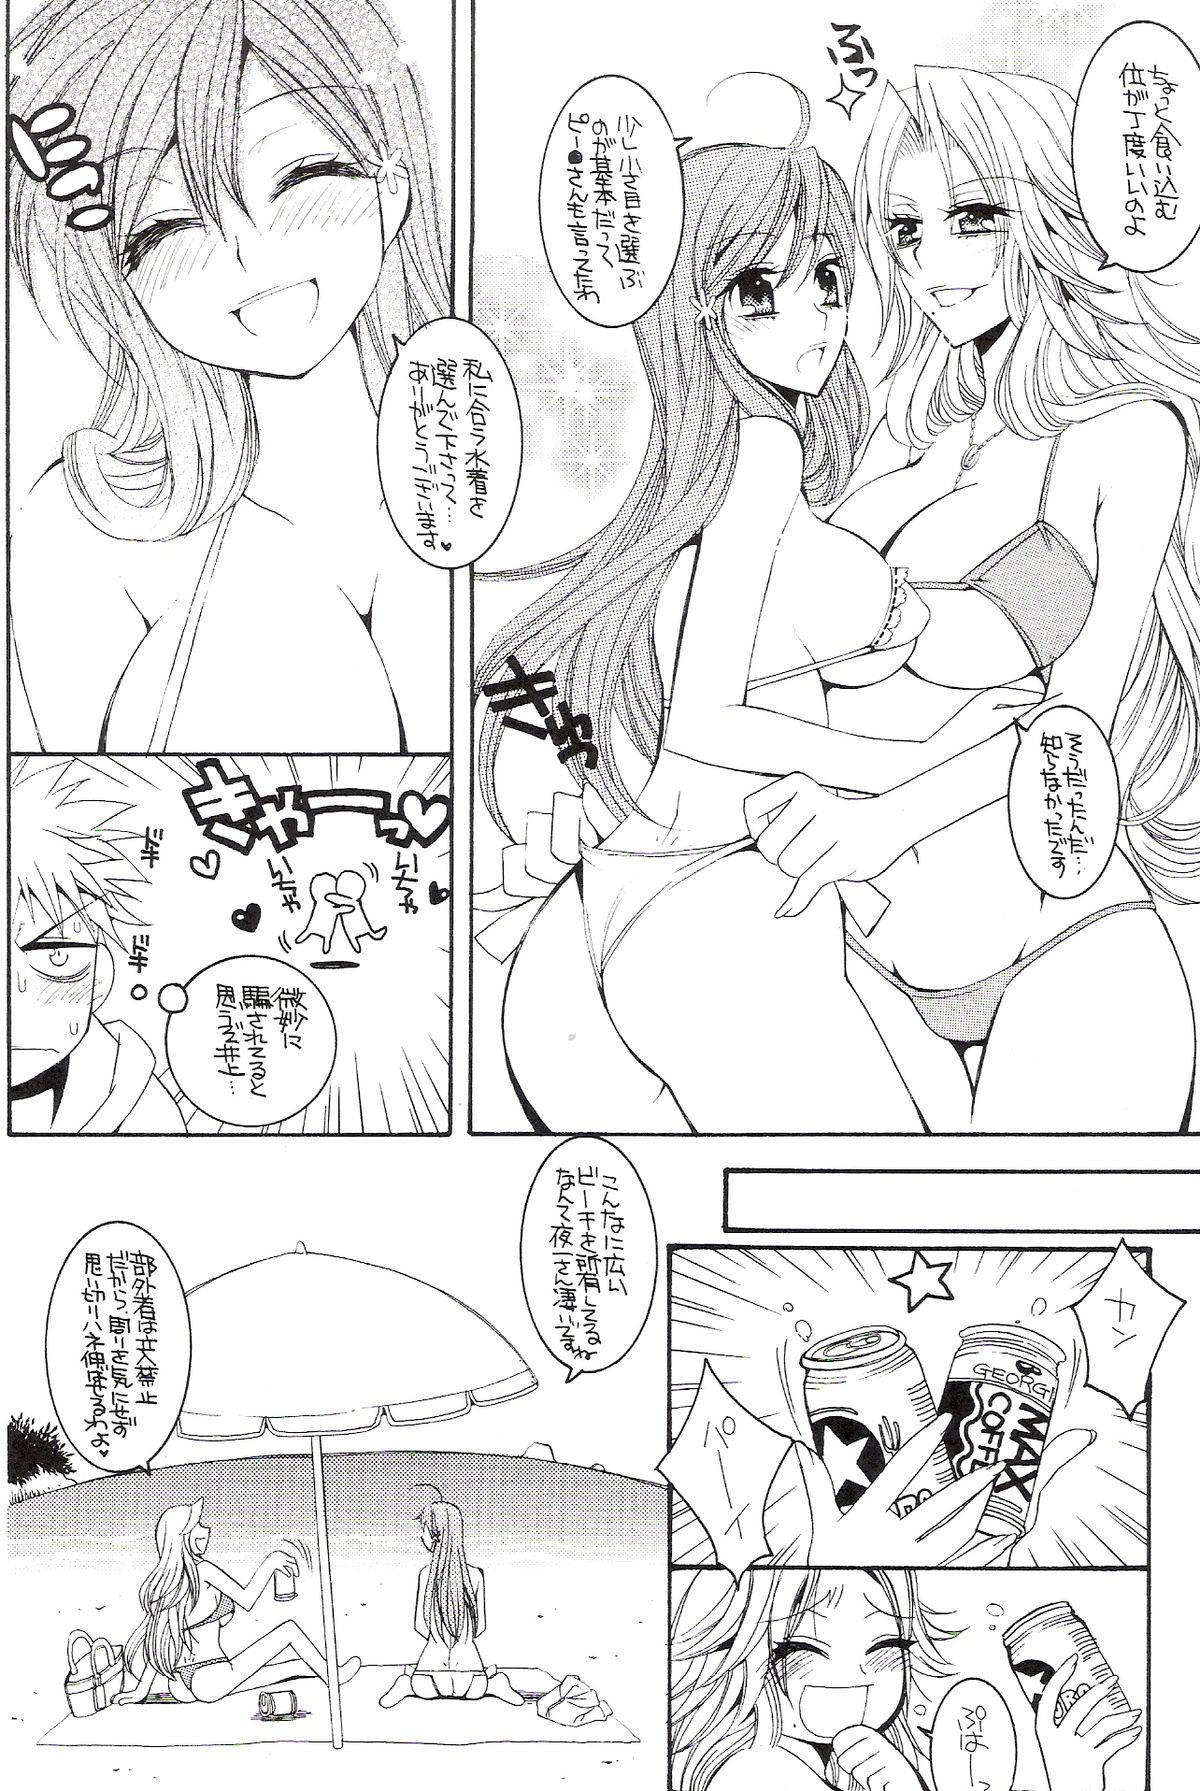 Strapon CHICK CHICK CHICK - Bleach Big Ass - Page 5